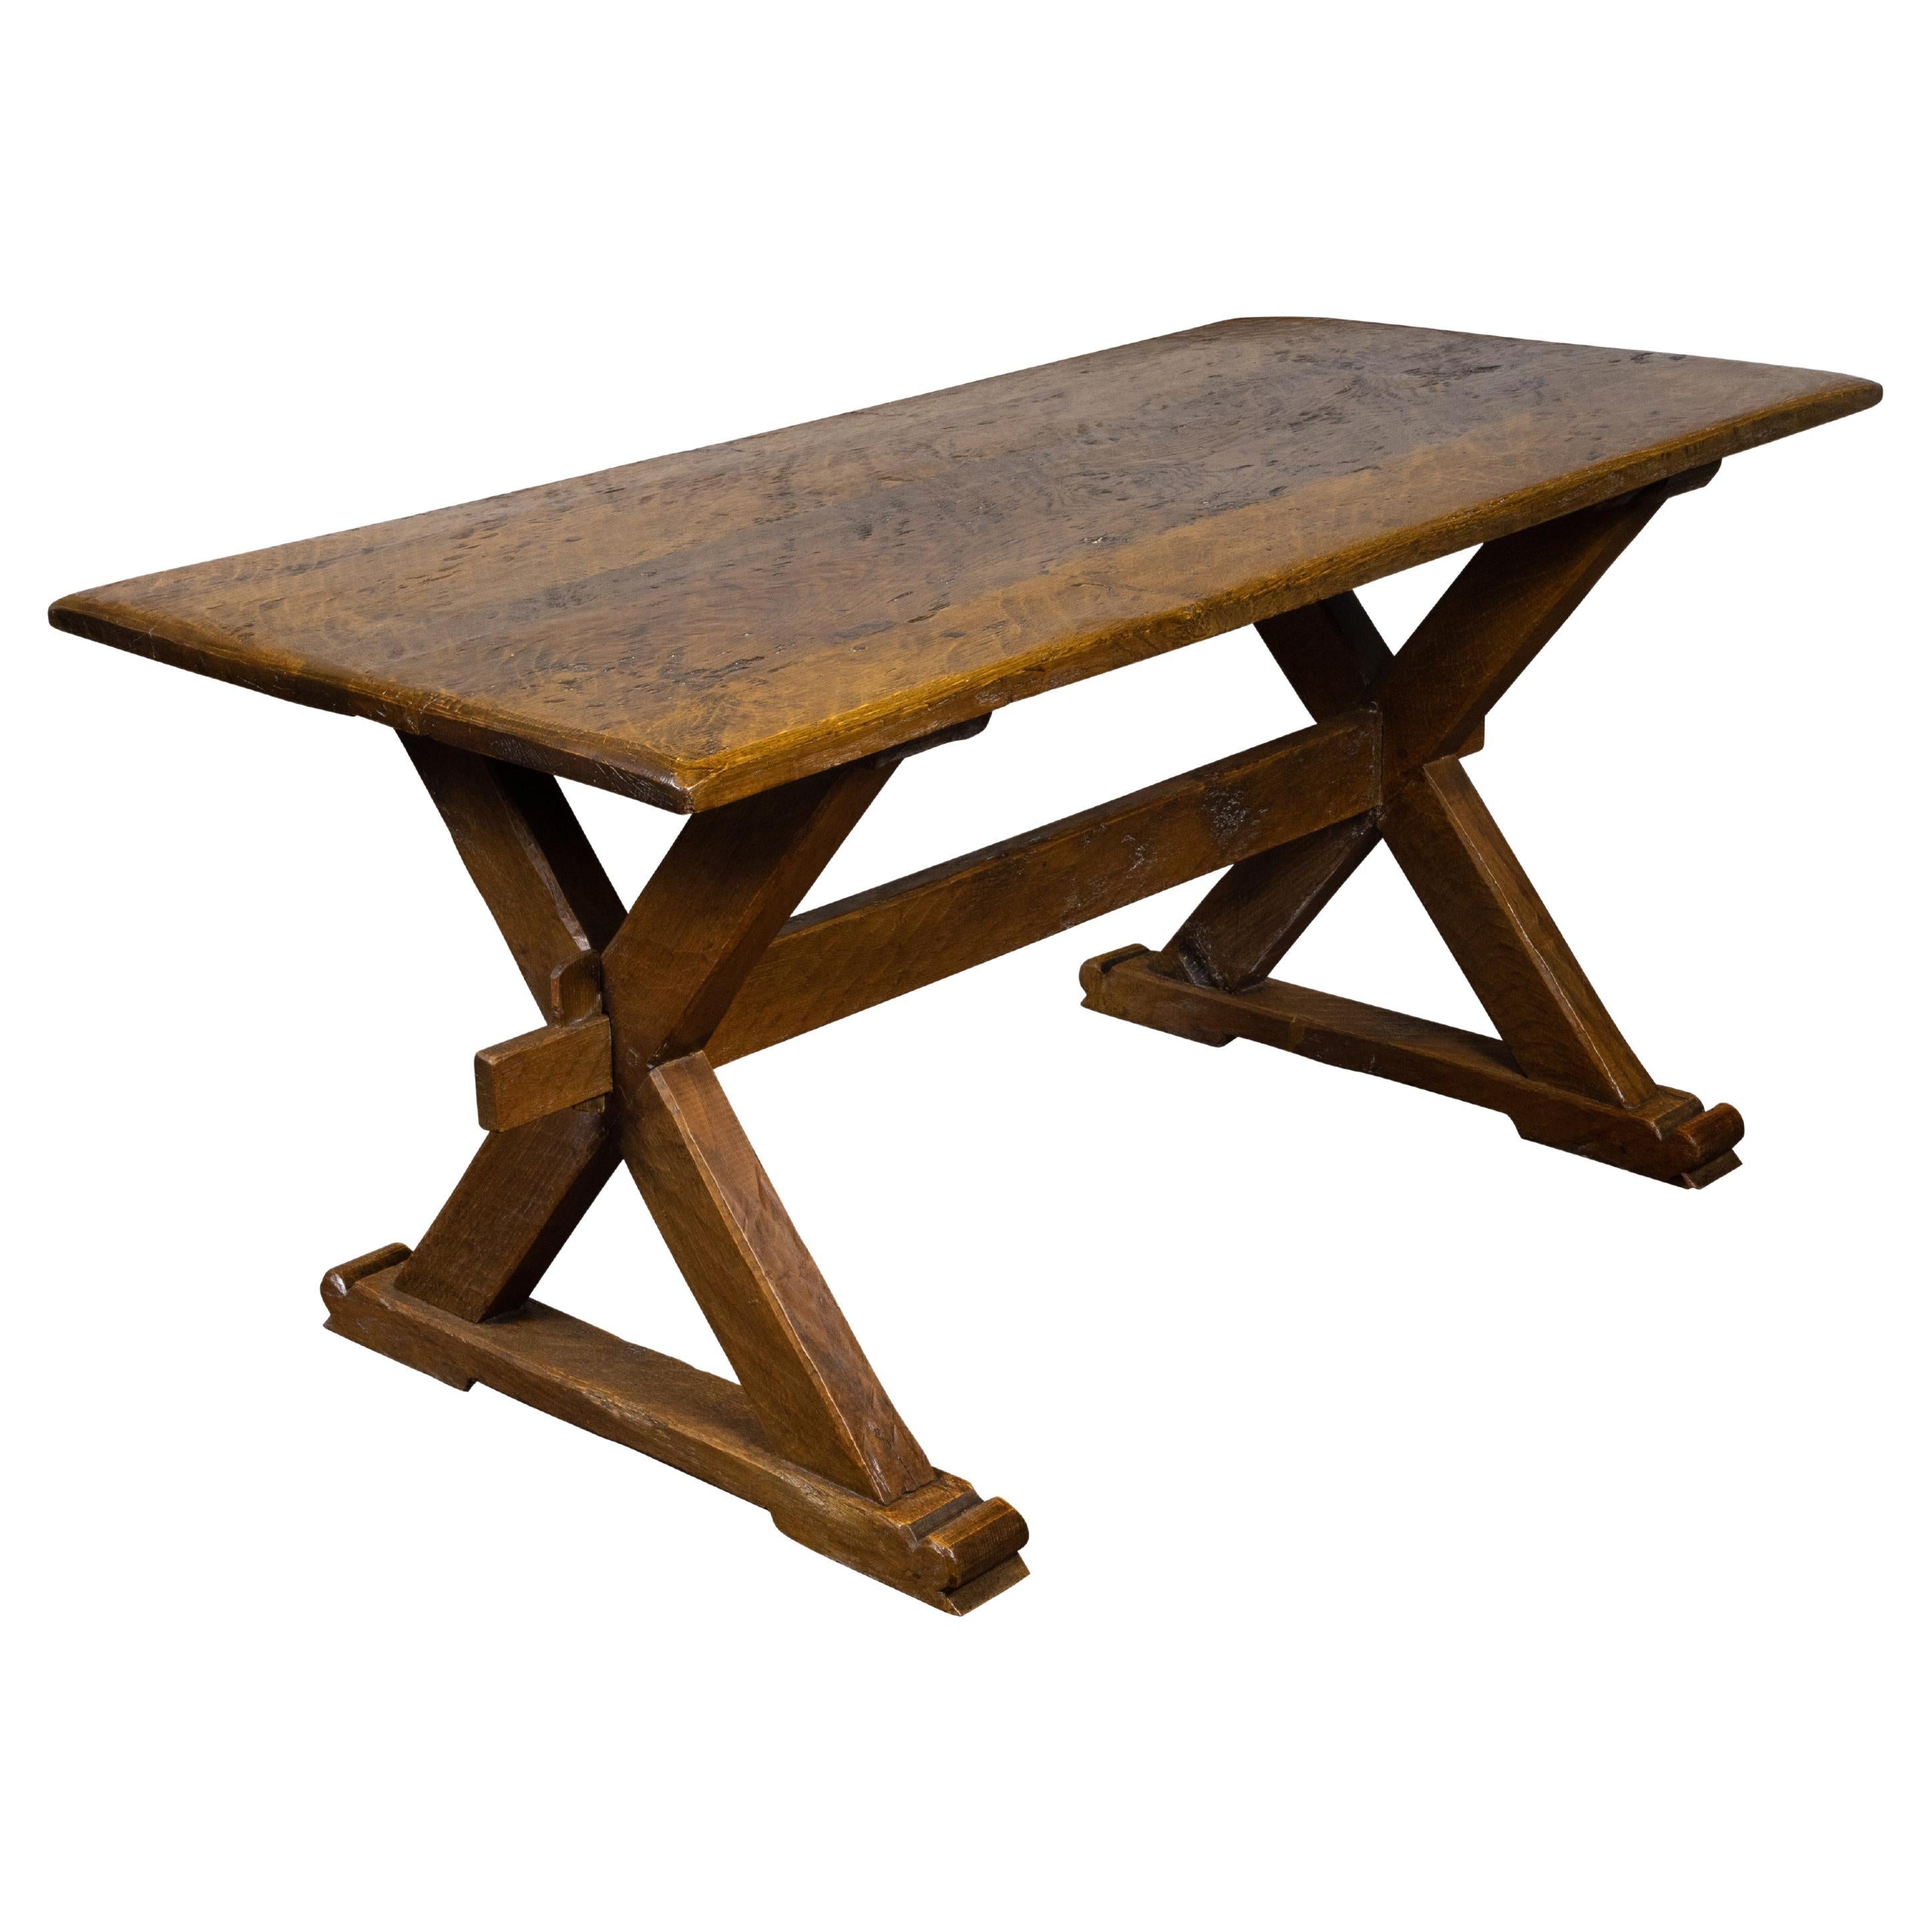 English 19th Century Oak Sawbuck Table with X-Form Base with Rustic Character For Sale